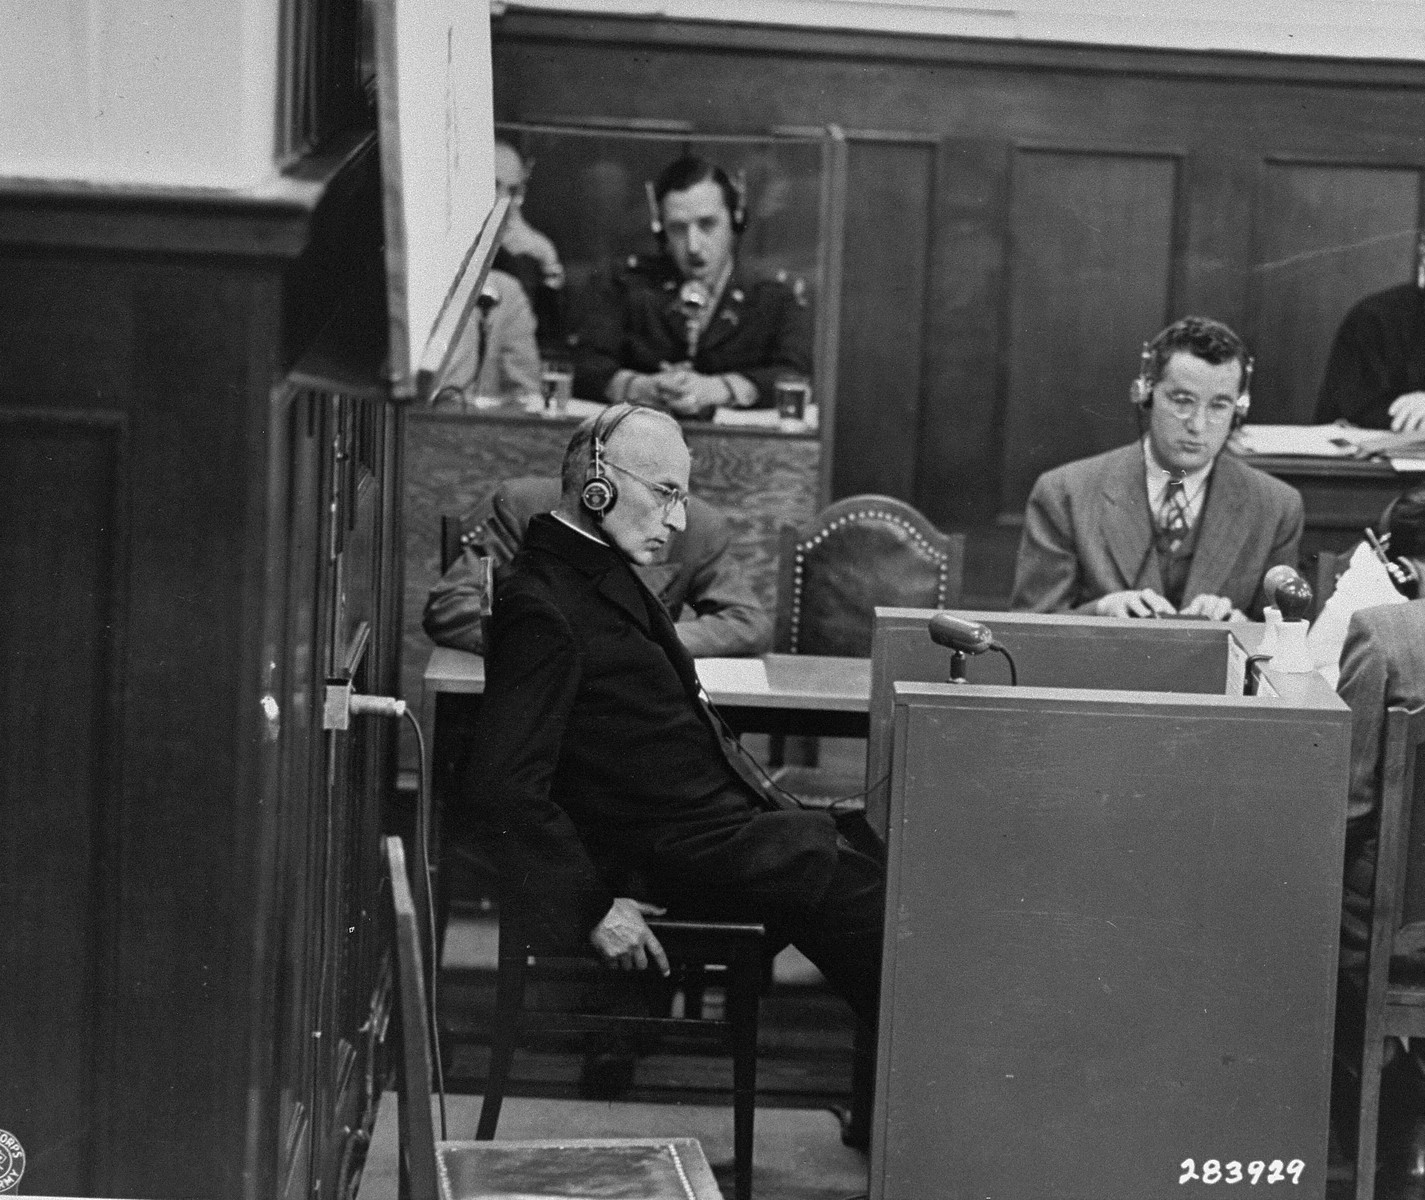 Benedict Wein, a priest from Amberg prison, gives testimony as a witness for the prosecution during the Justice Case.  The testimony took place in a room in the Palace of Justice outside the main courtroom.